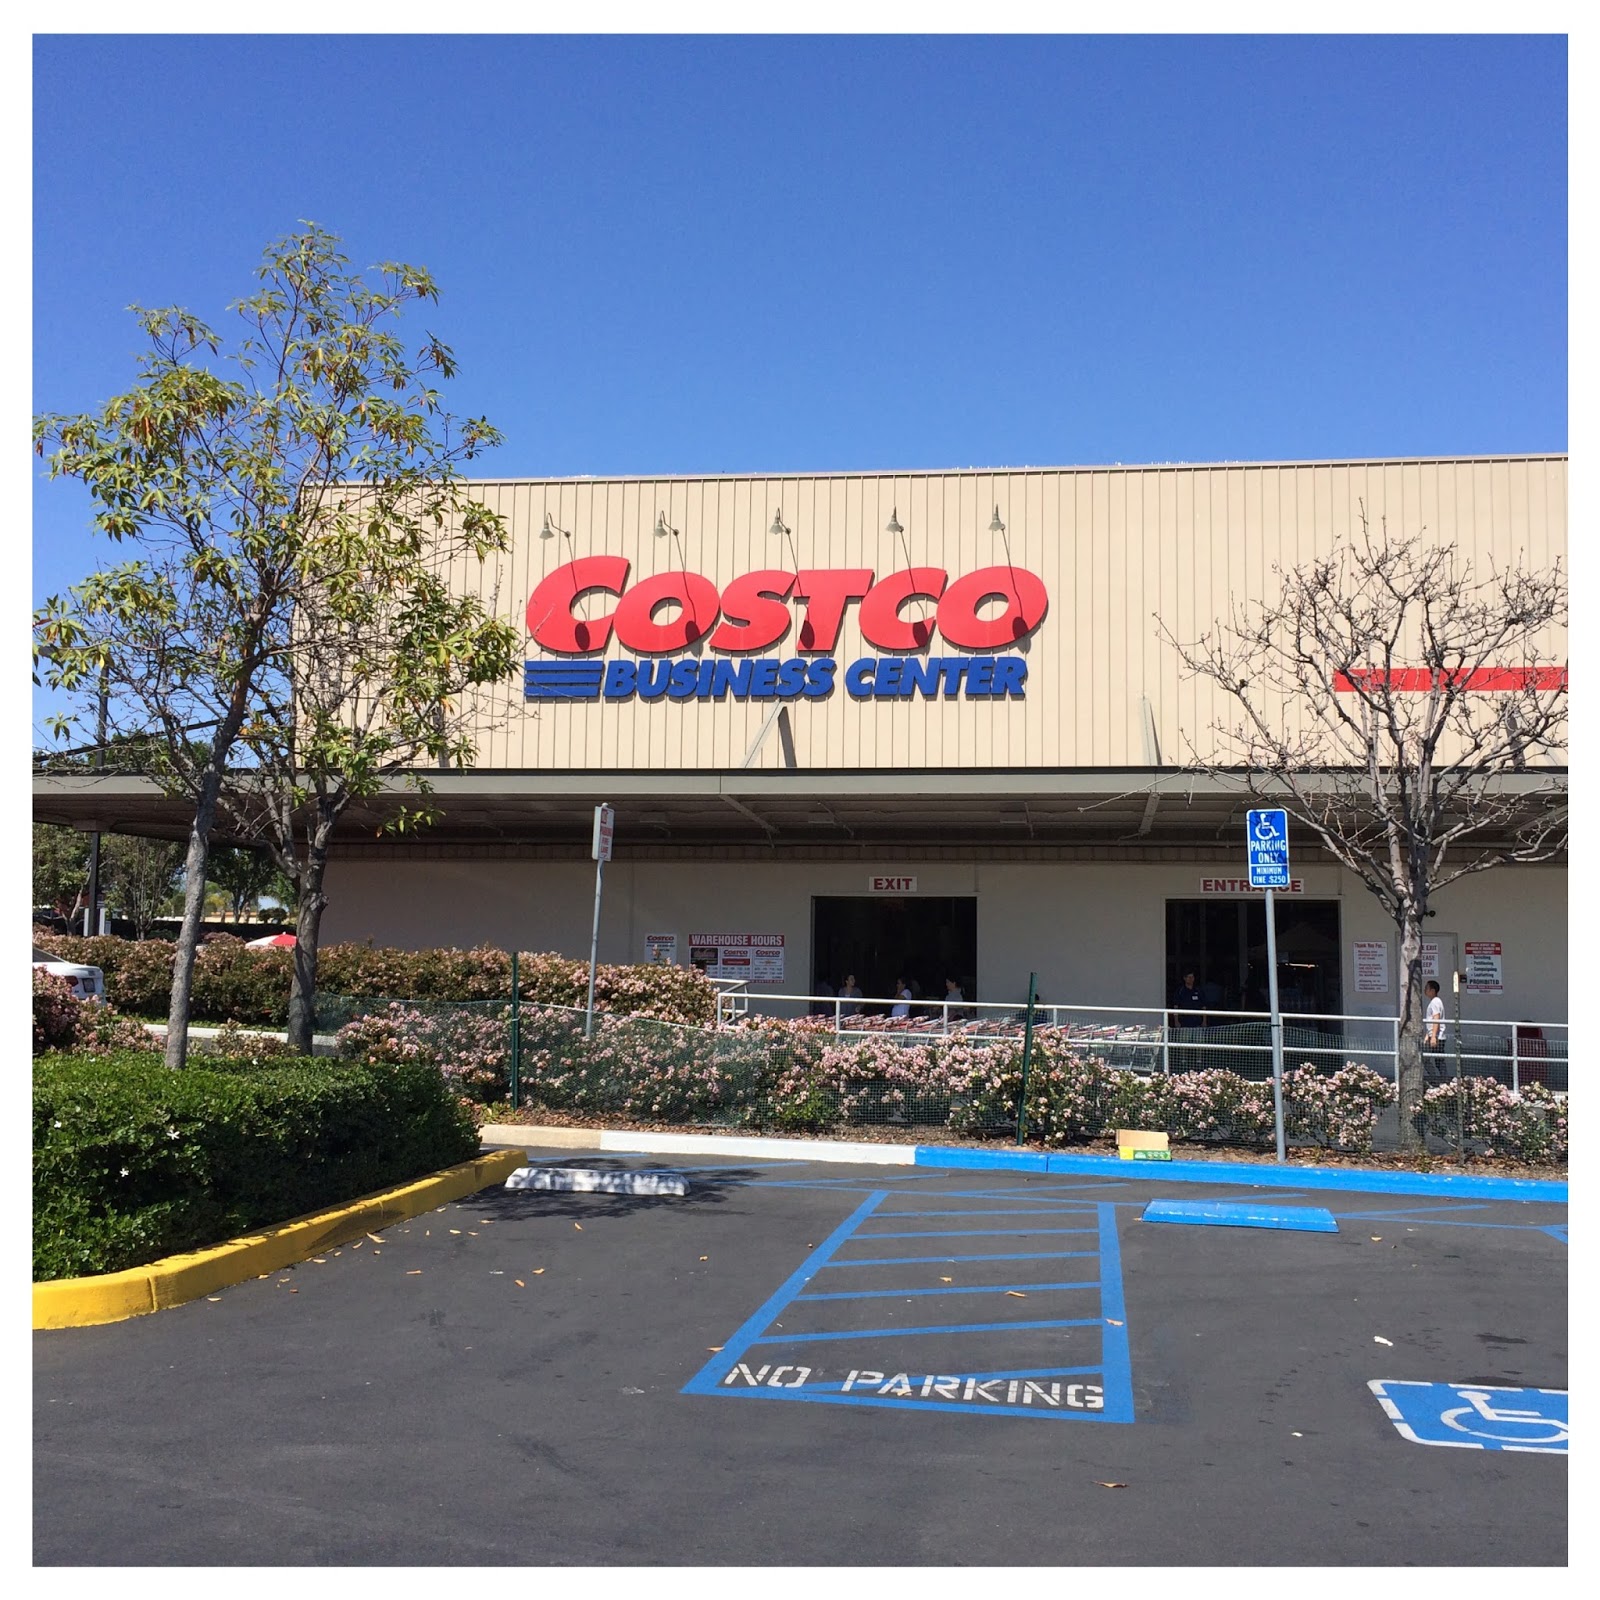 Collection 103+ Images costco wholesale – business center dallas photos Latest